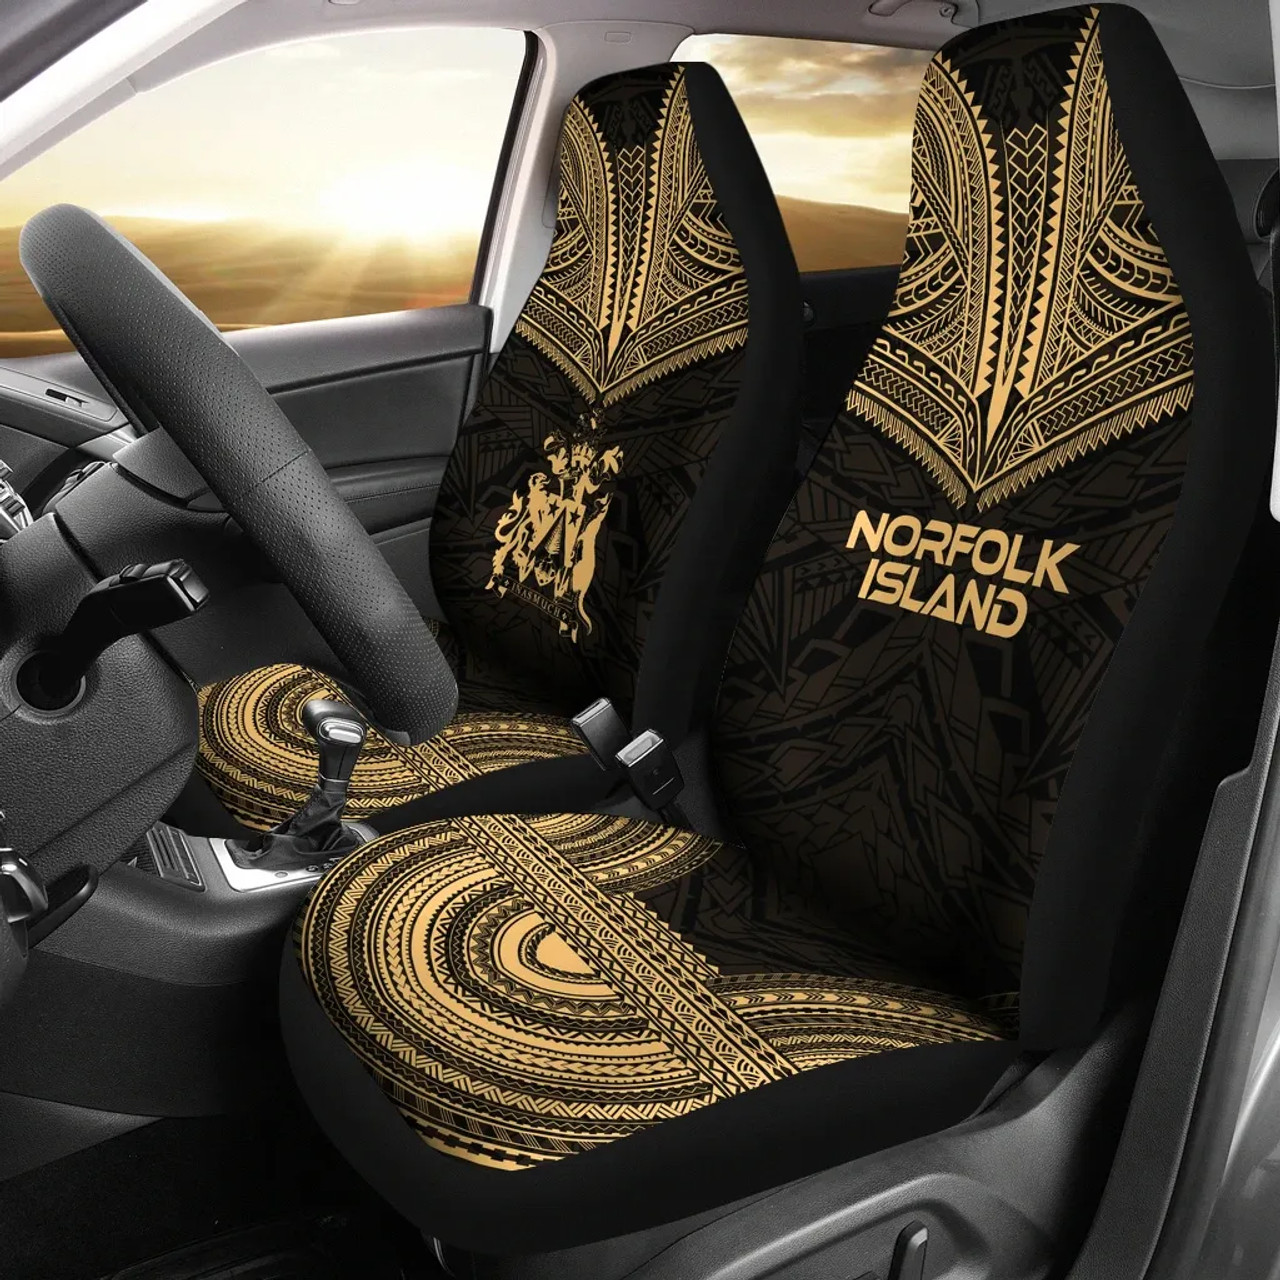 Norfolk Island Car Seat Cover - Norfolk Island Coat Of Arms Polynesian Chief Tattoo Gold Version